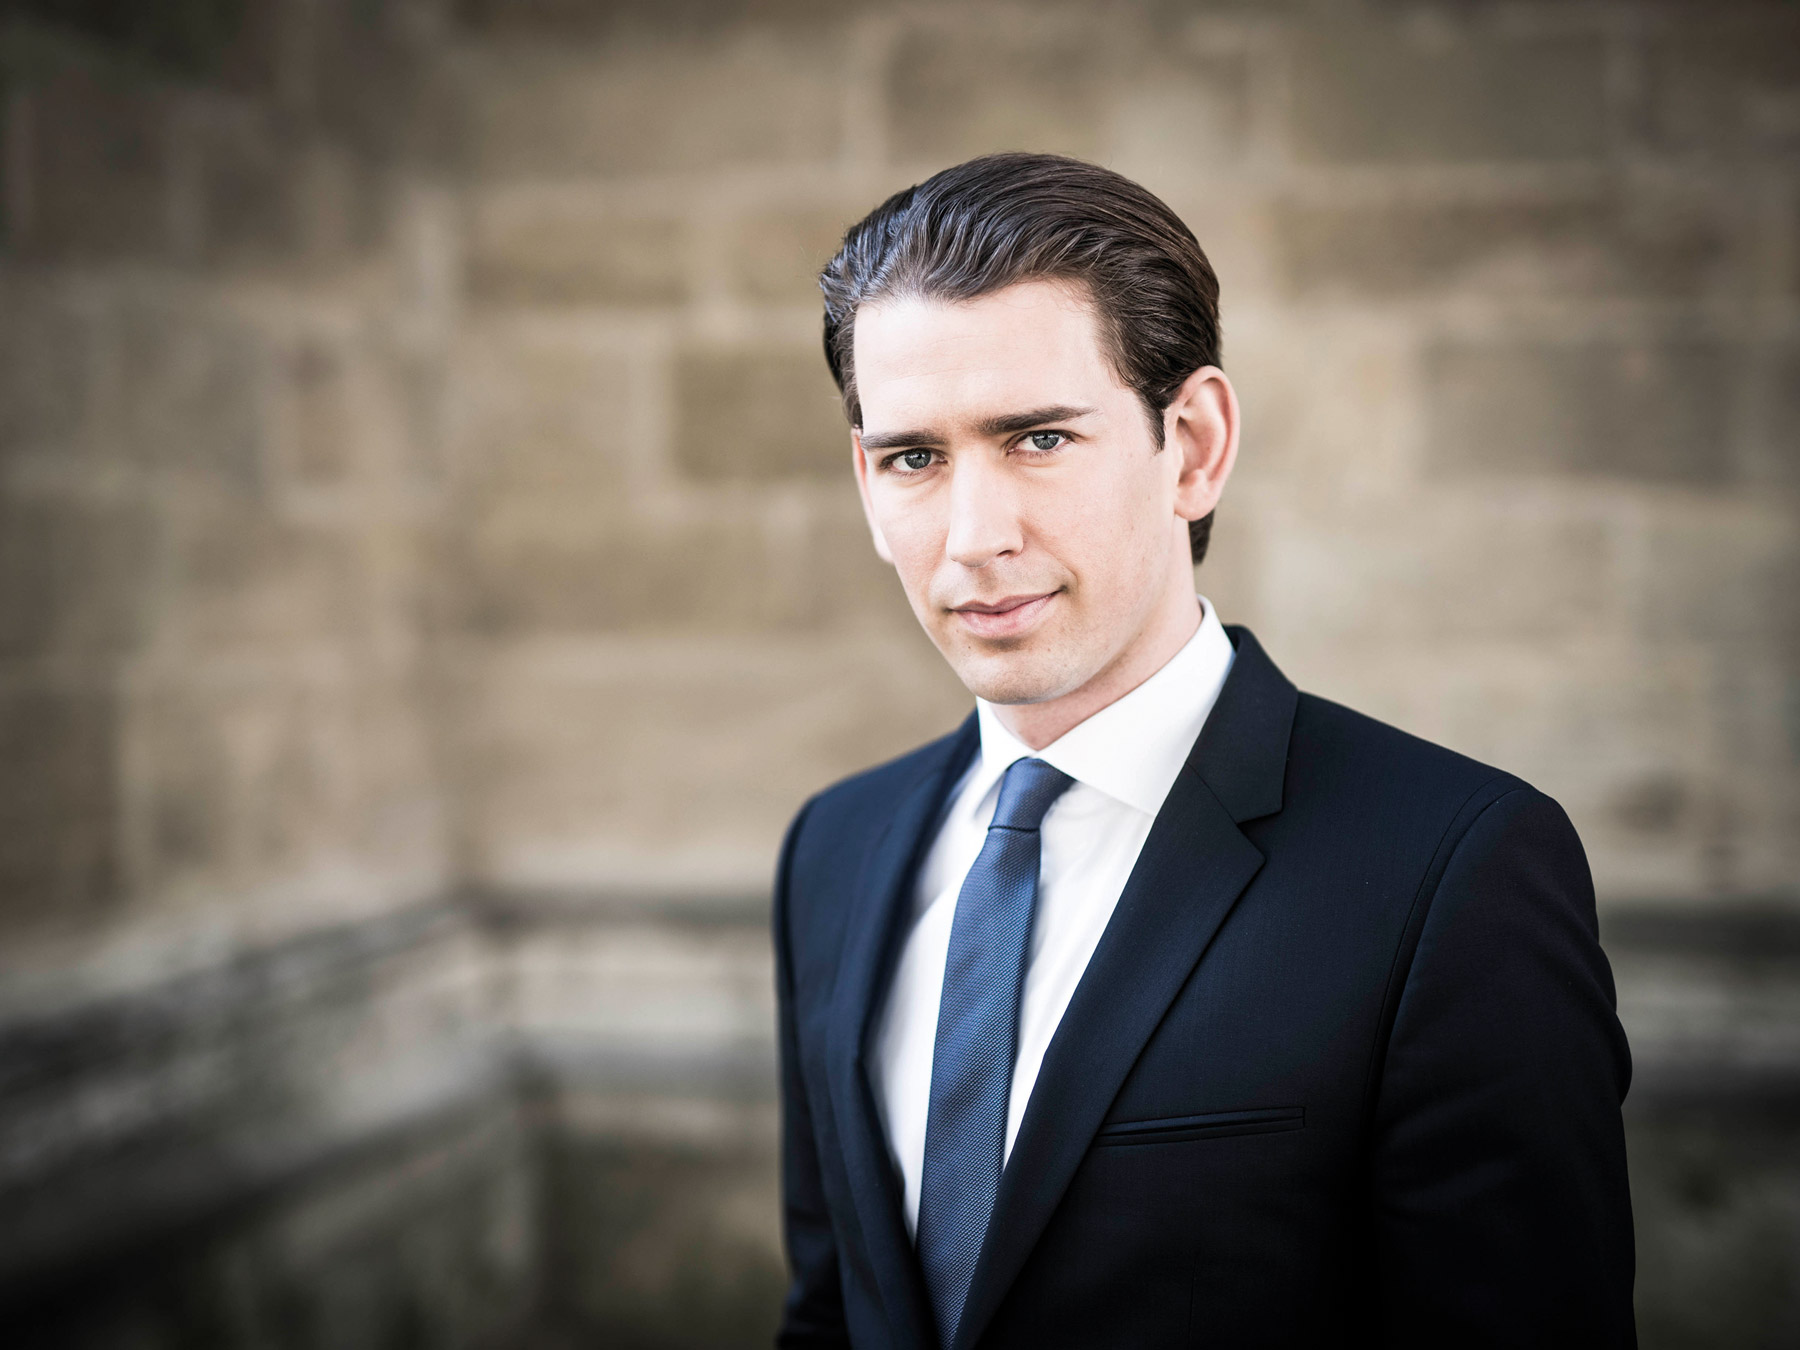 Seriously! 15+  Facts About Sebastian Kurz: Kurz has also been chairman of the austrian people's party since may 2017.